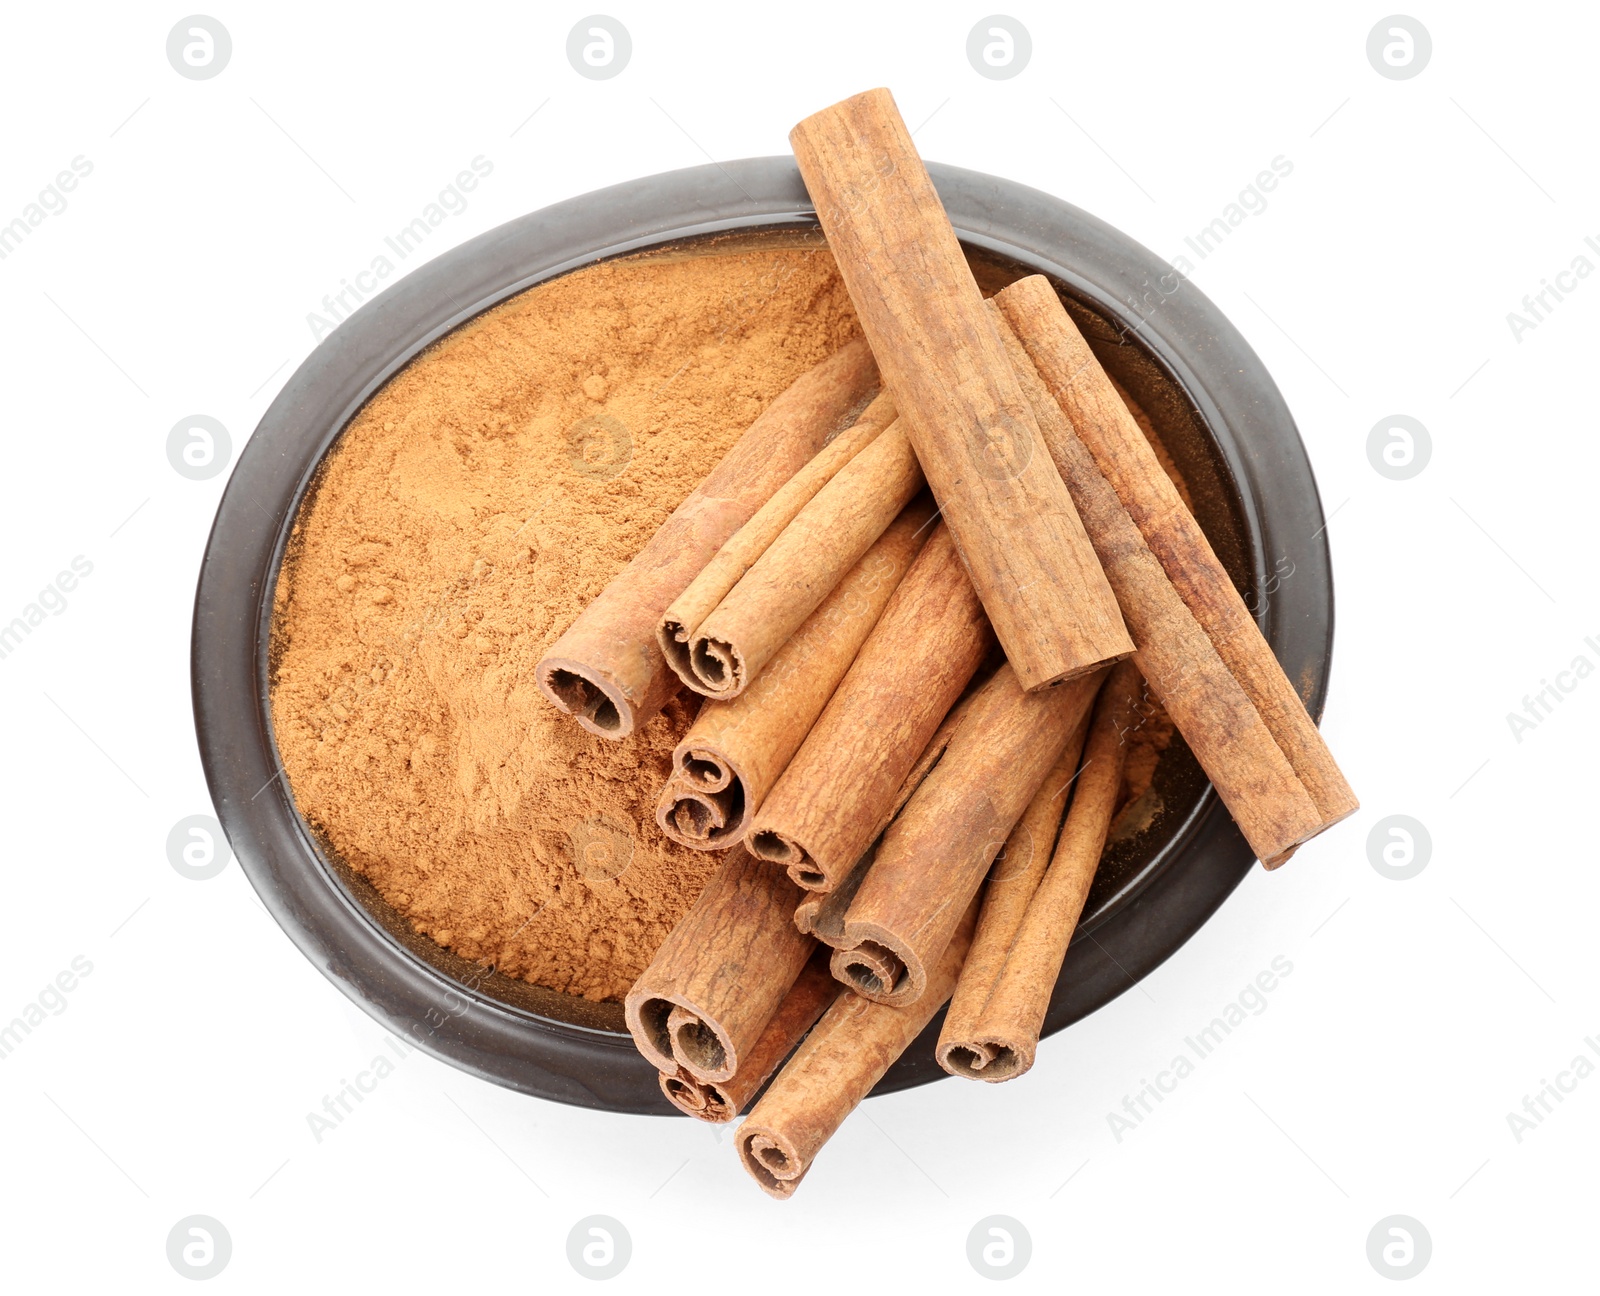 Photo of Bowl with aromatic cinnamon sticks and powder on white background